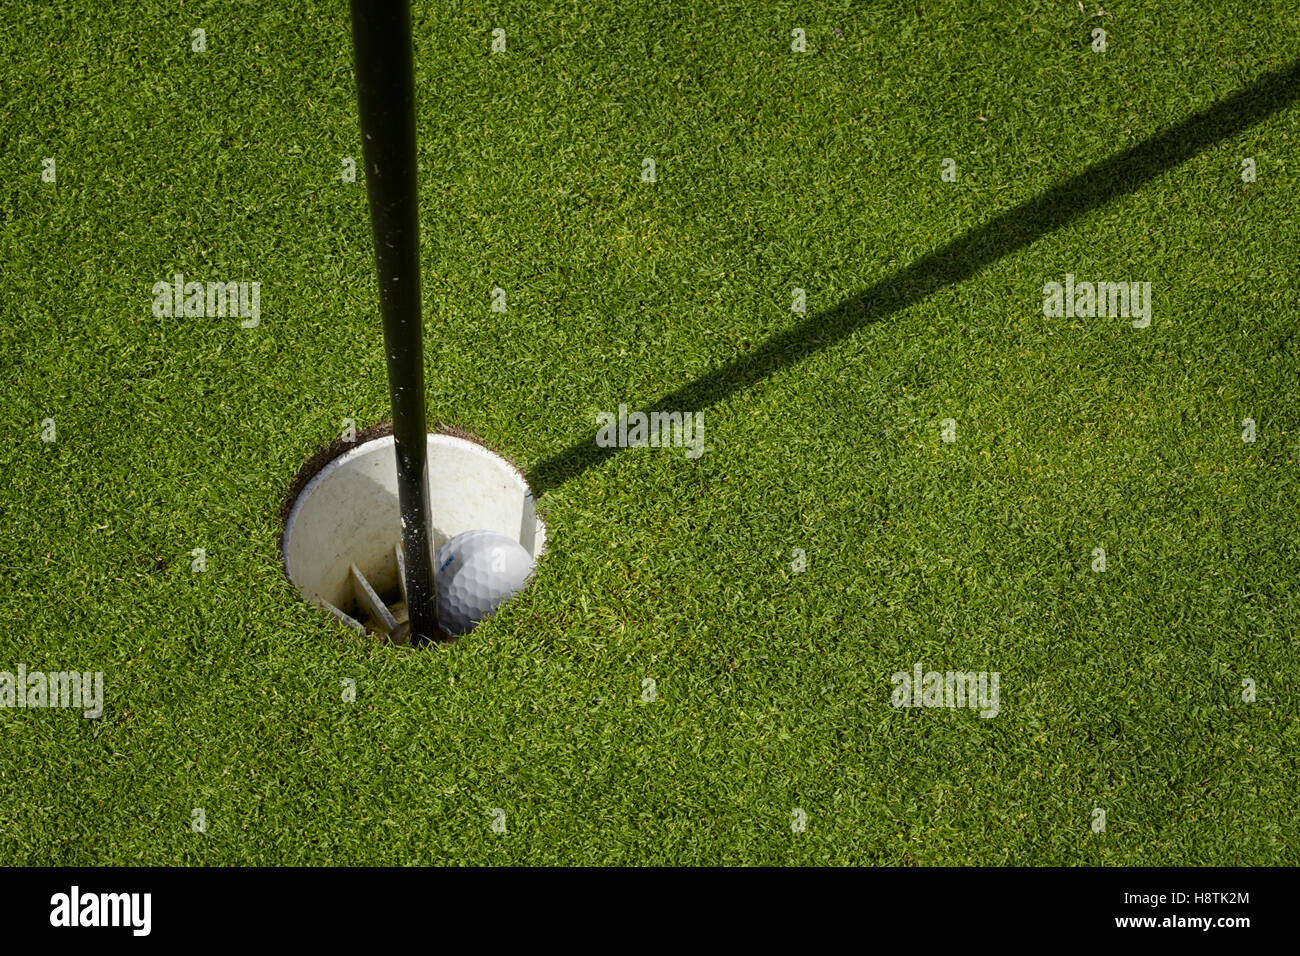 Golf ball inside a cup on a golf course. Putting a green with flag. Stock Photo